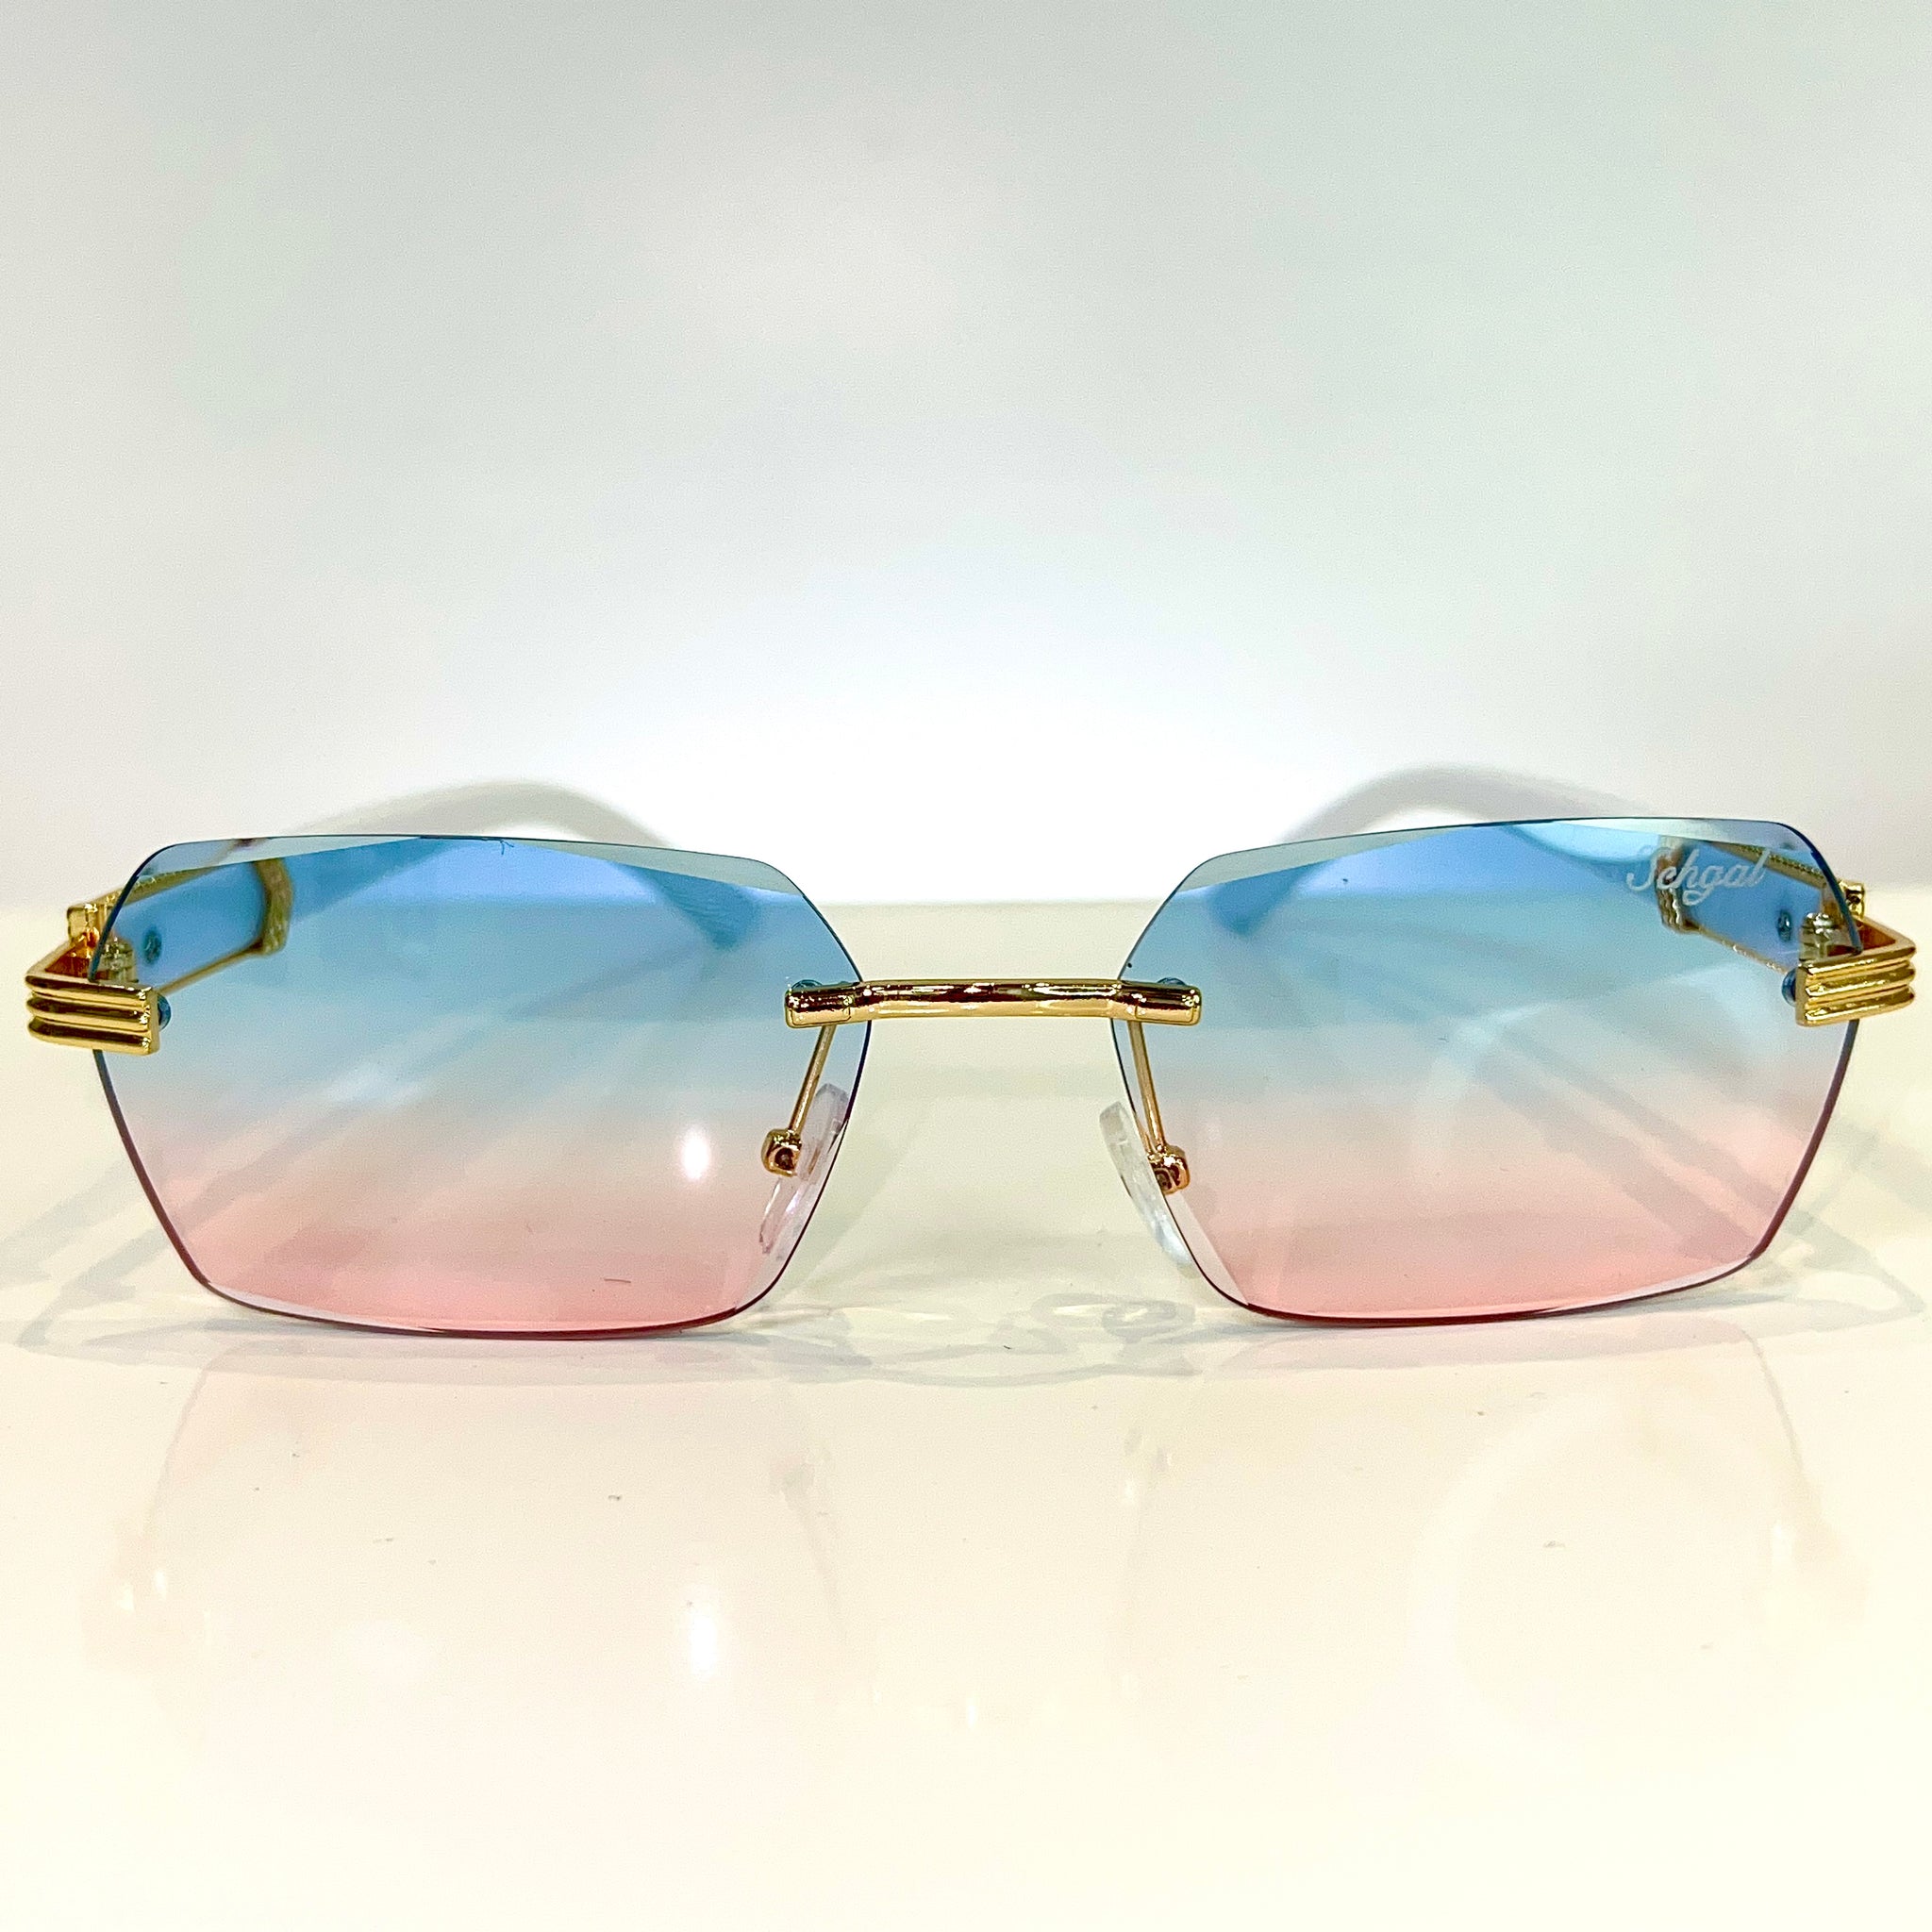 Marblecut Glasses - 14 carat gold plated -  Pink / Blue Shade